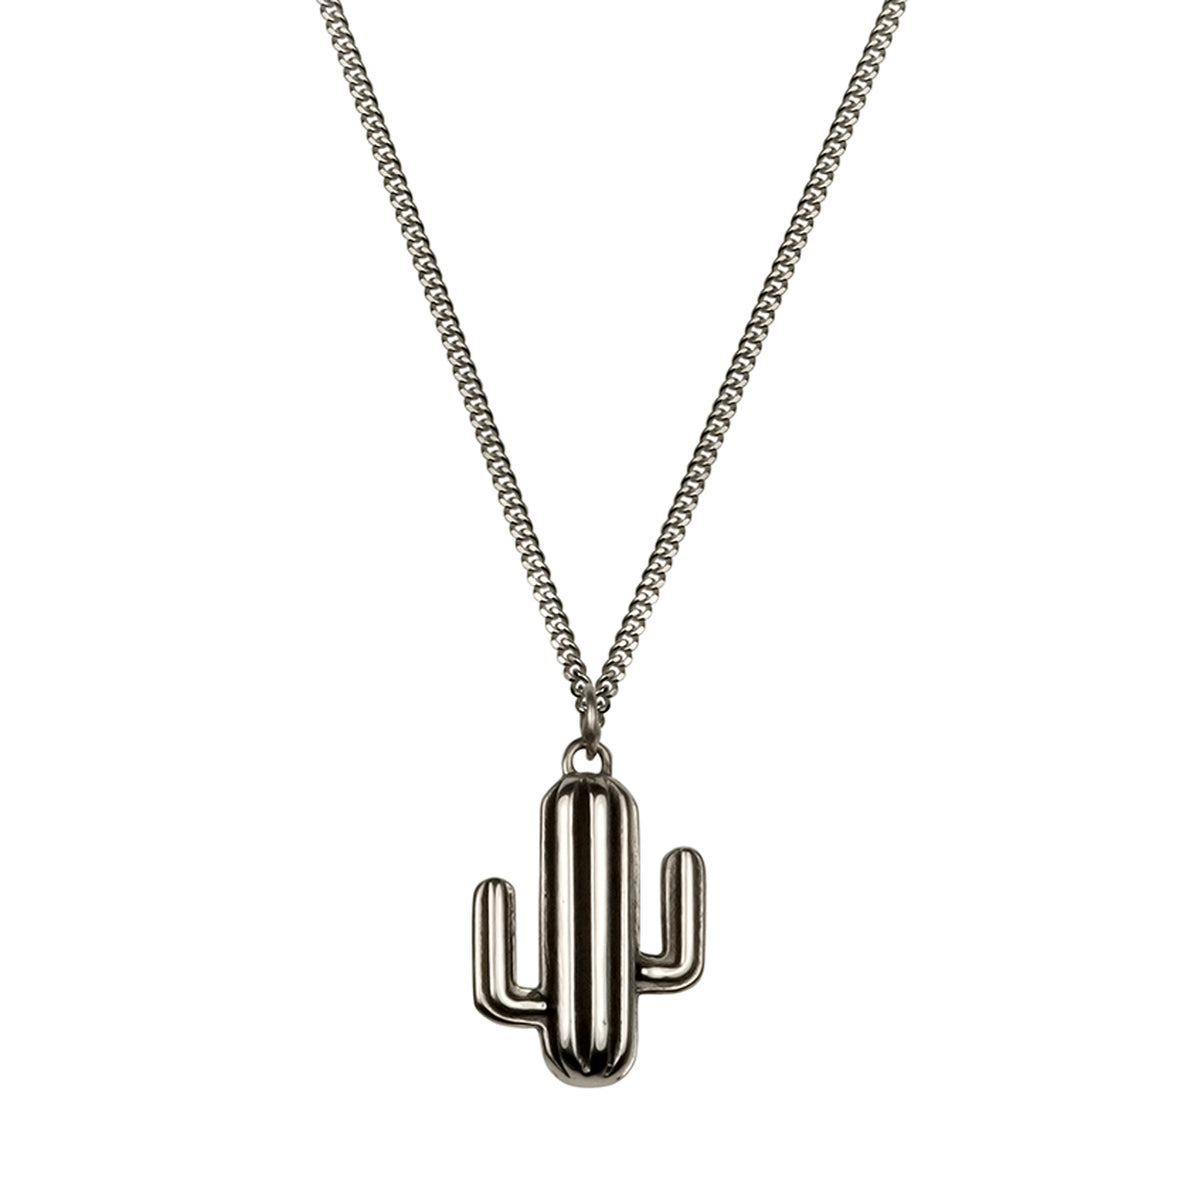 Cactus Necklace - Oxydised silver - IndependentBoutique.com